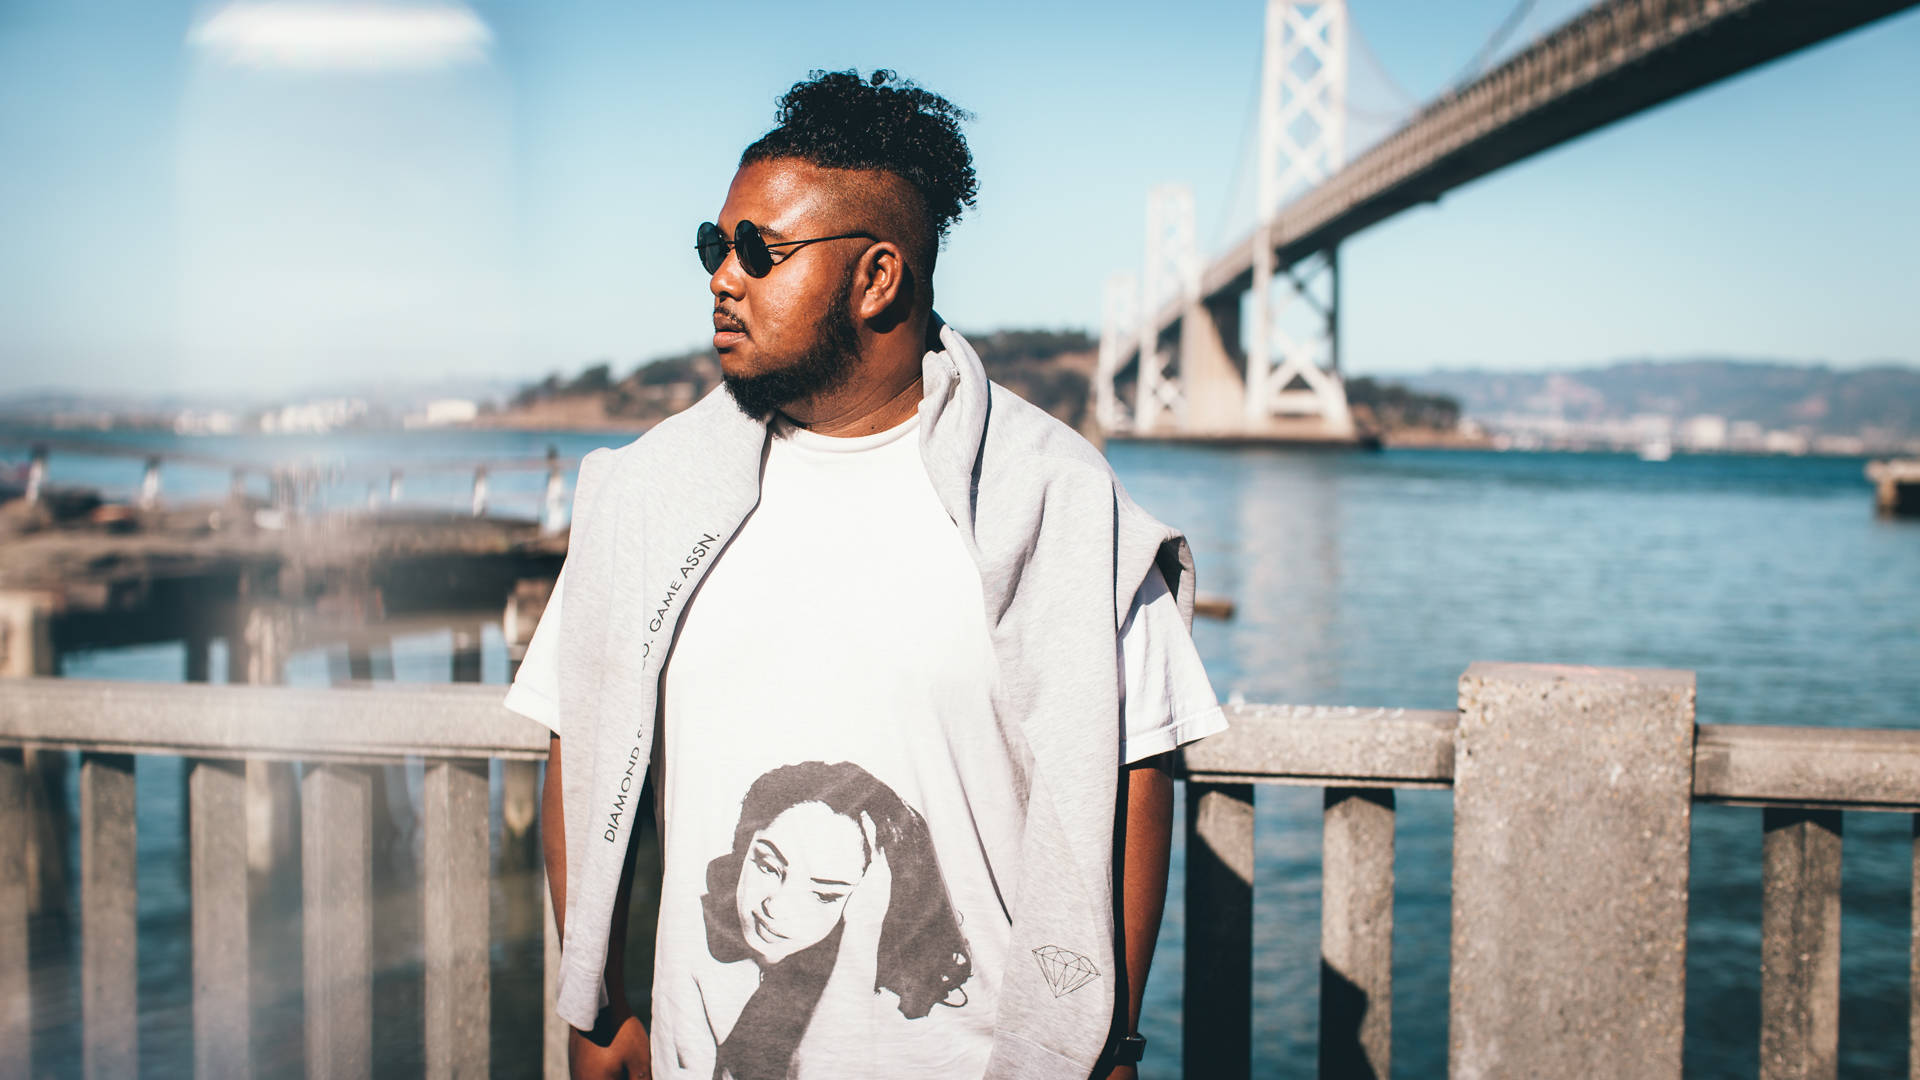 Trackademicks (neé Jason Valerio) is among the many musicians who've had to leave the Bay Area for L.A. for industry opportunities. Kristina Bakrevski